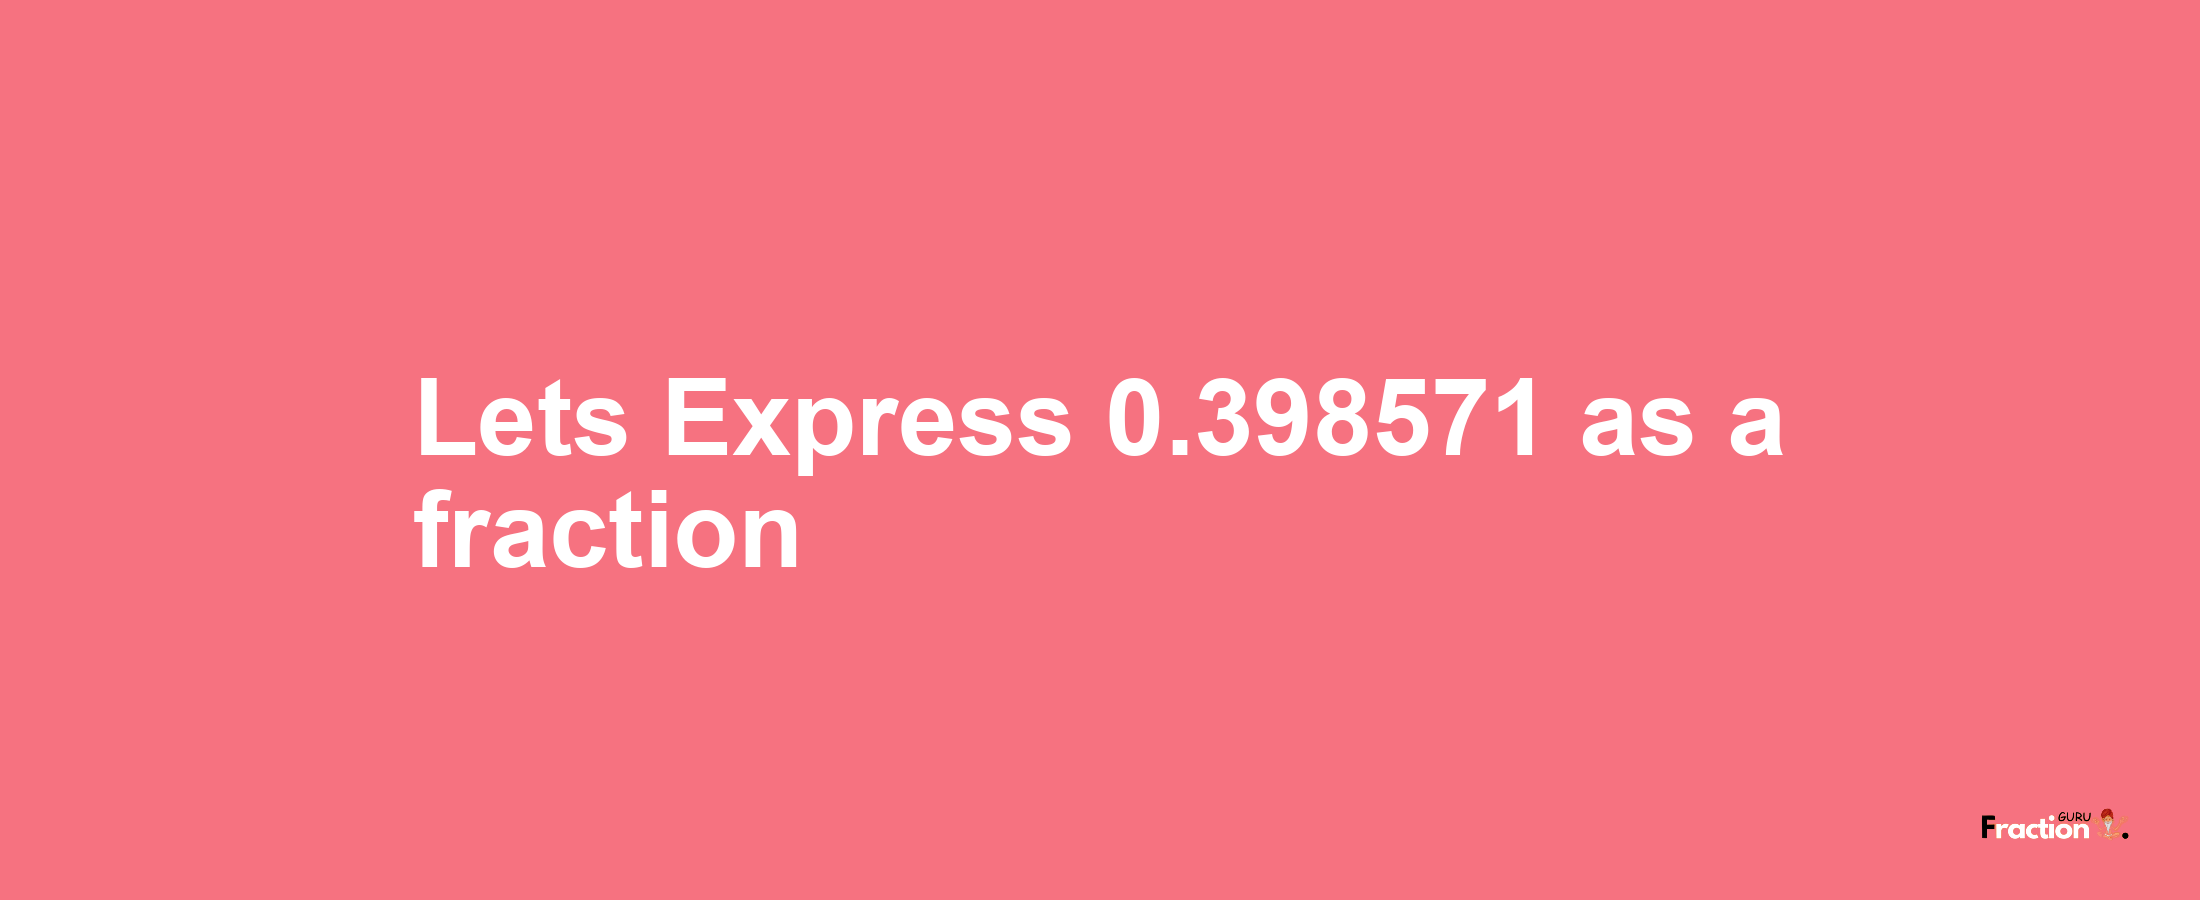 Lets Express 0.398571 as afraction